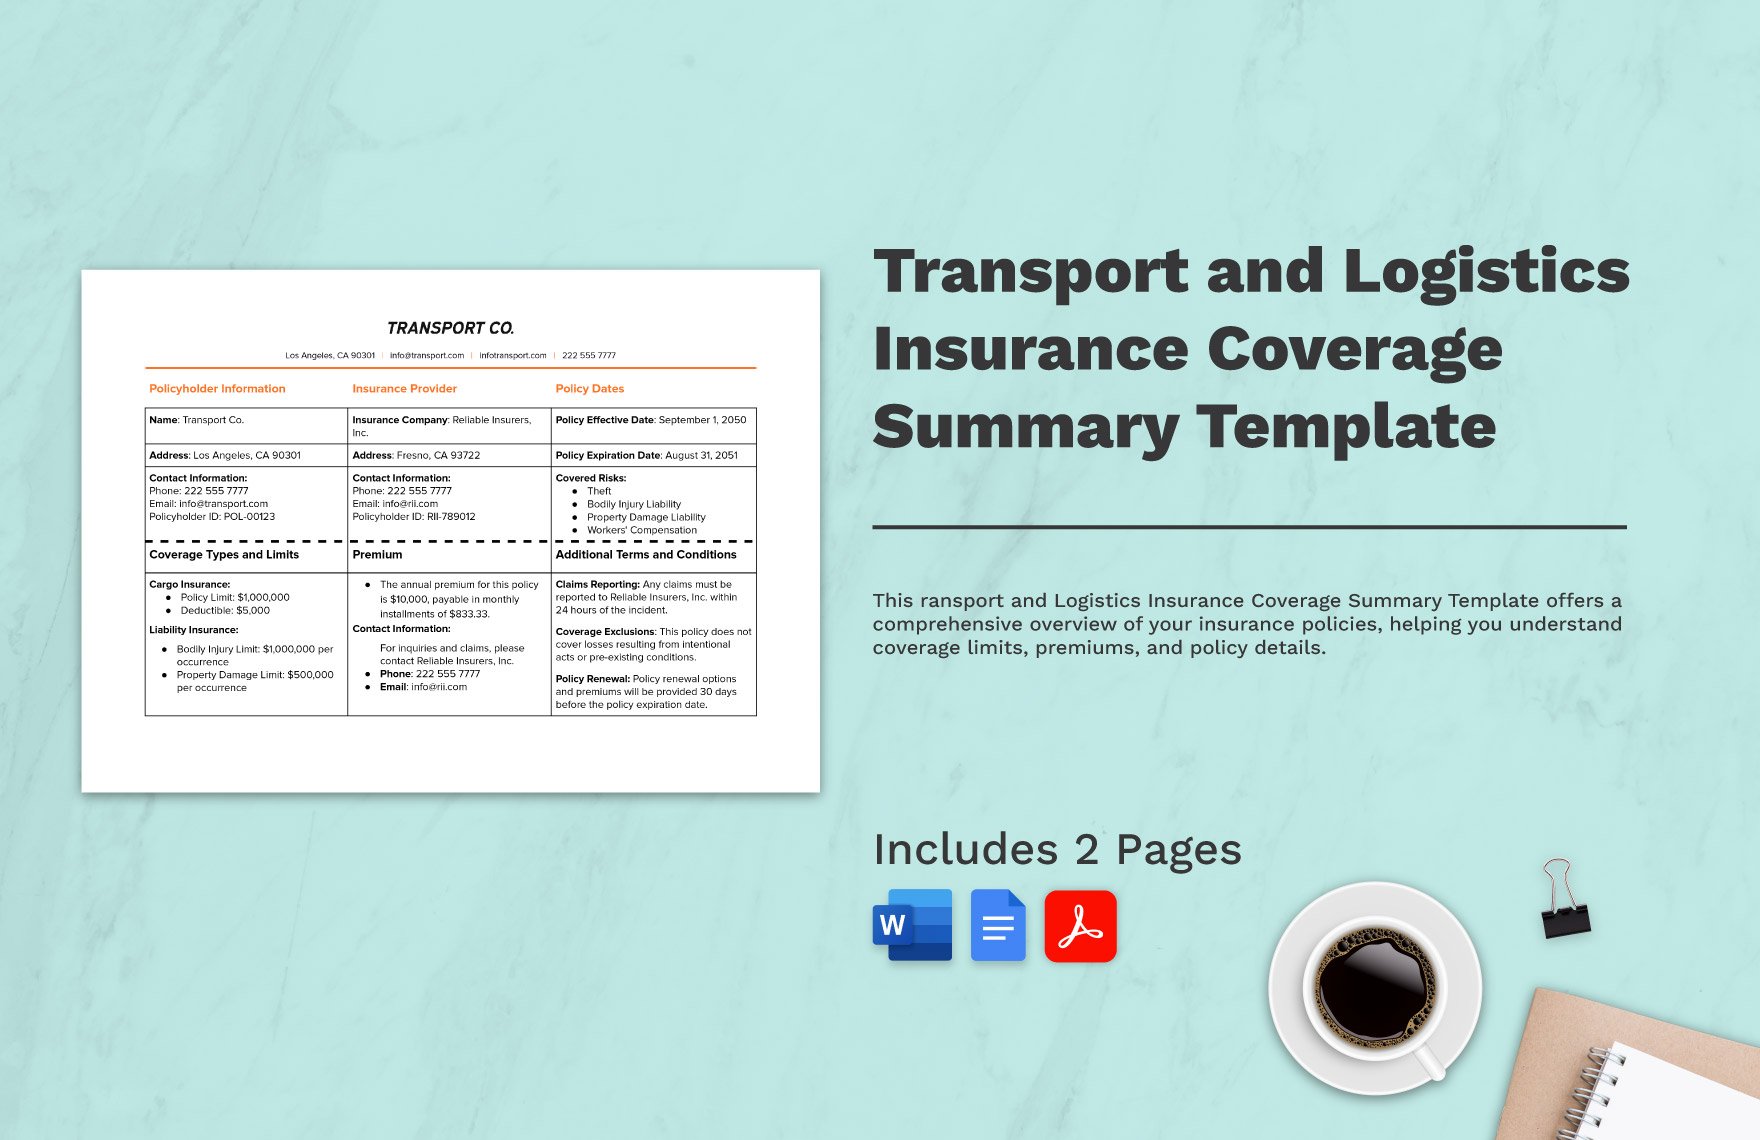 Transport and Logistics Insurance Coverage Summary Template